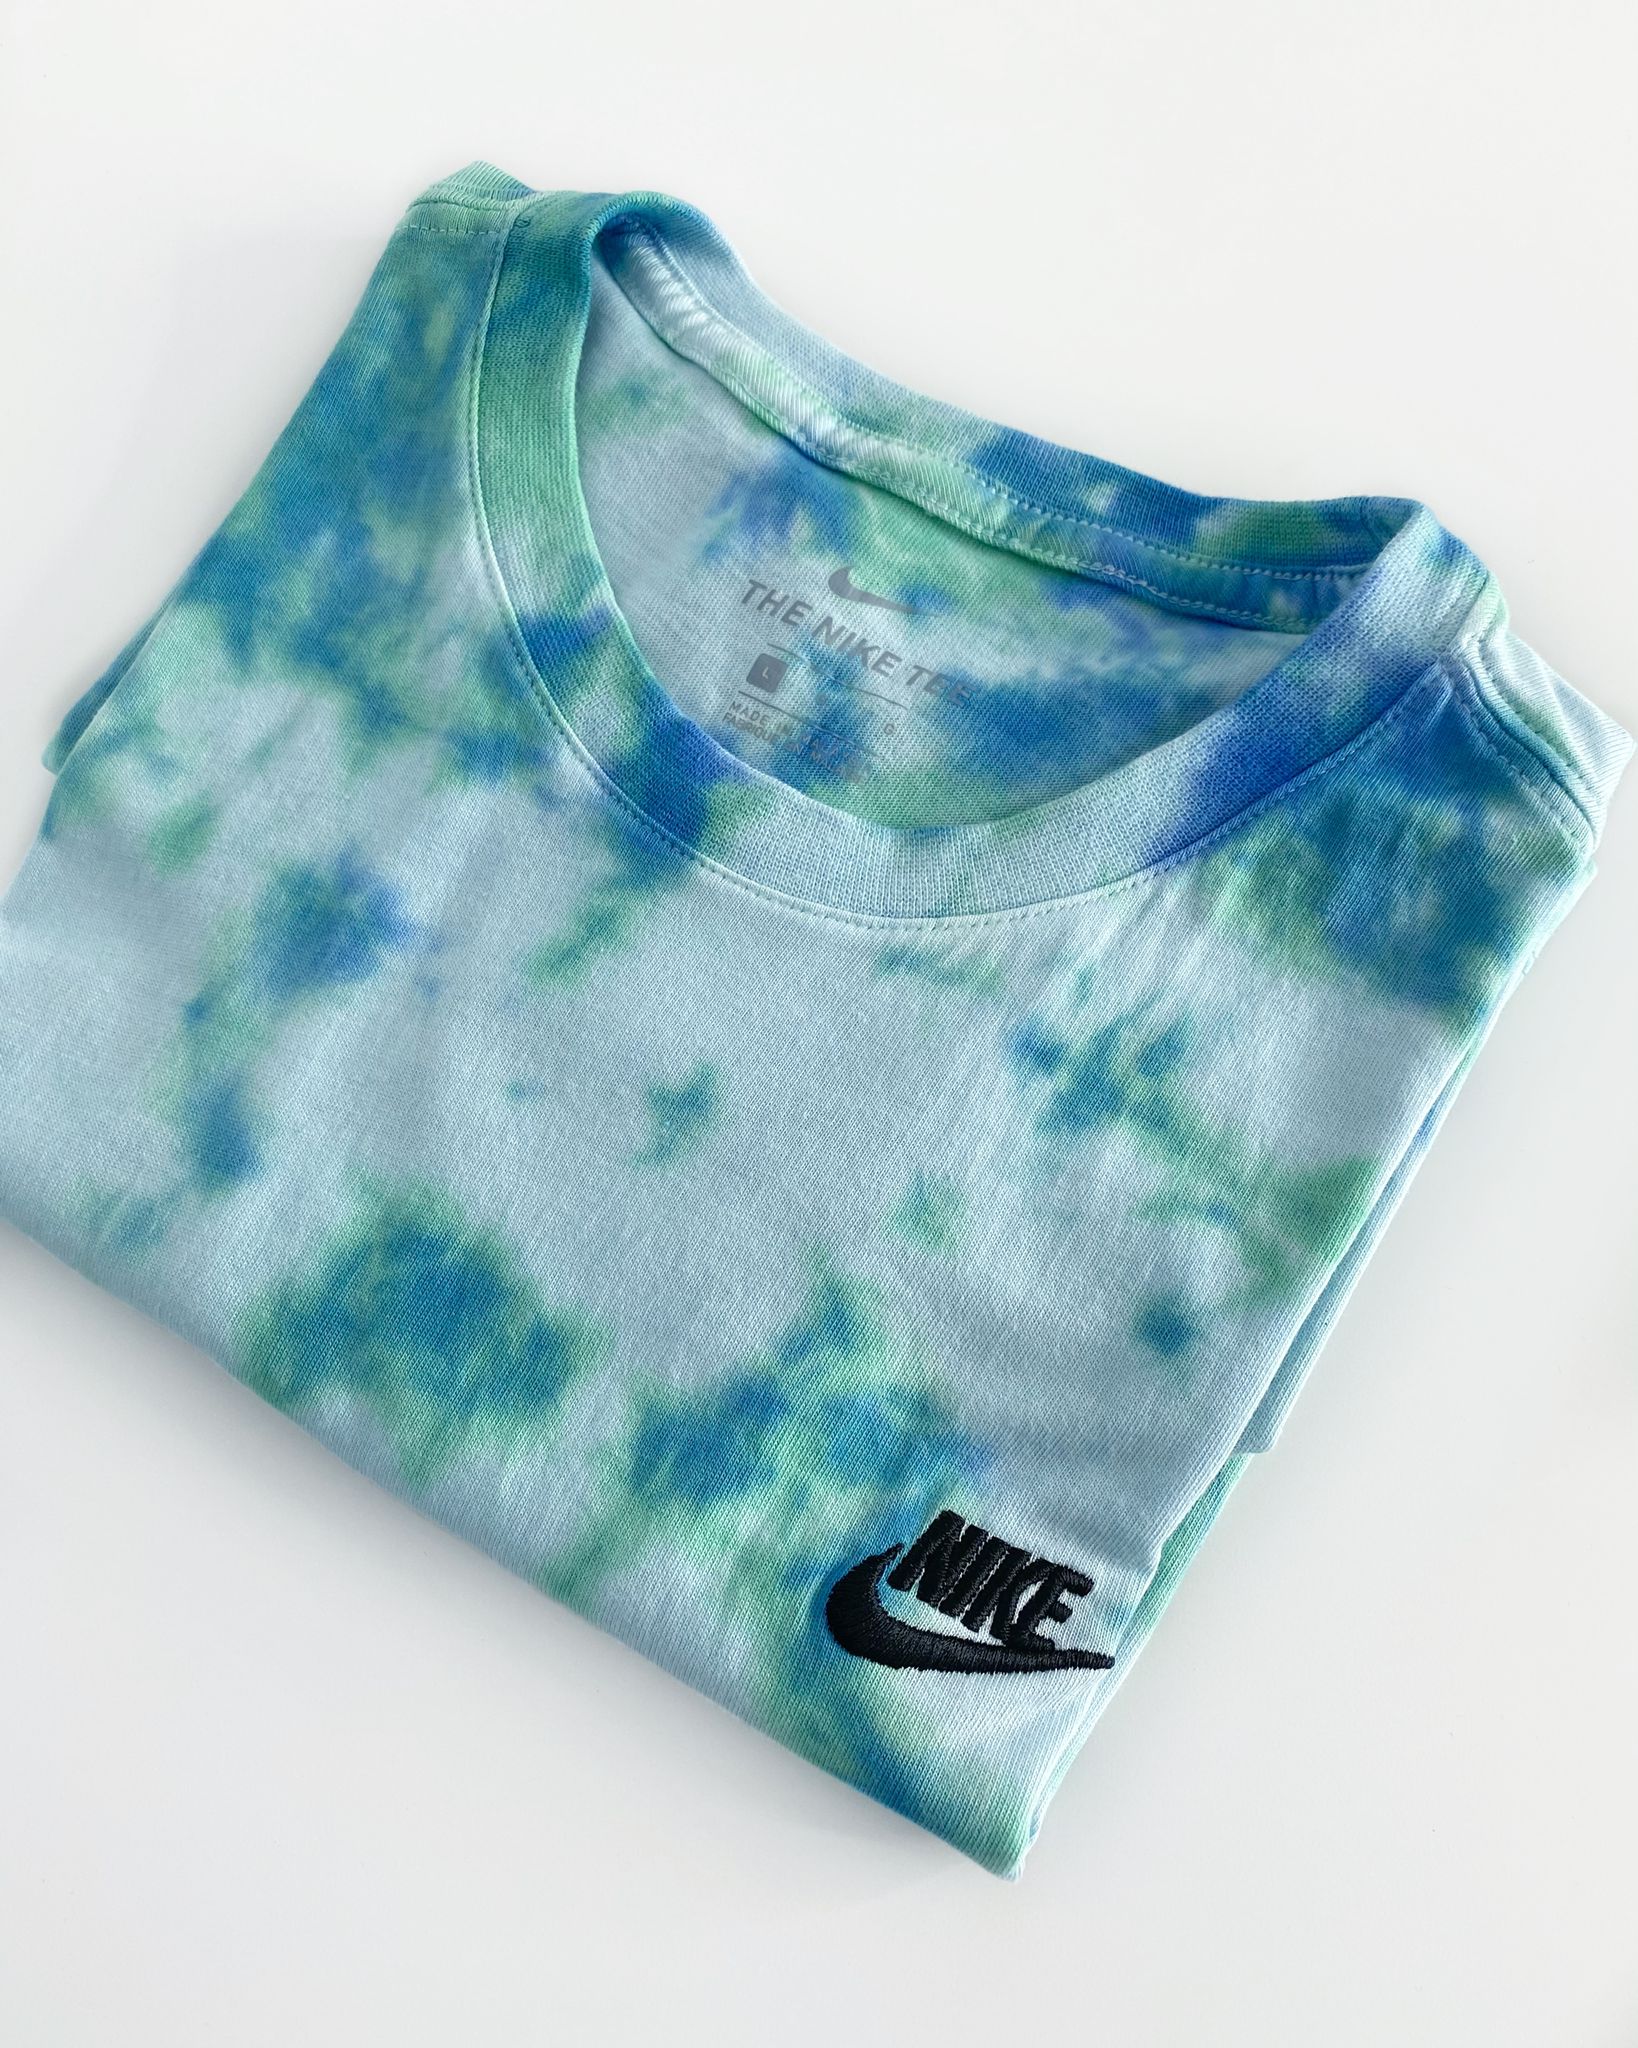 Unique hand-dyed Tulip tie dye Nike tee with a relaxed, easy feel.